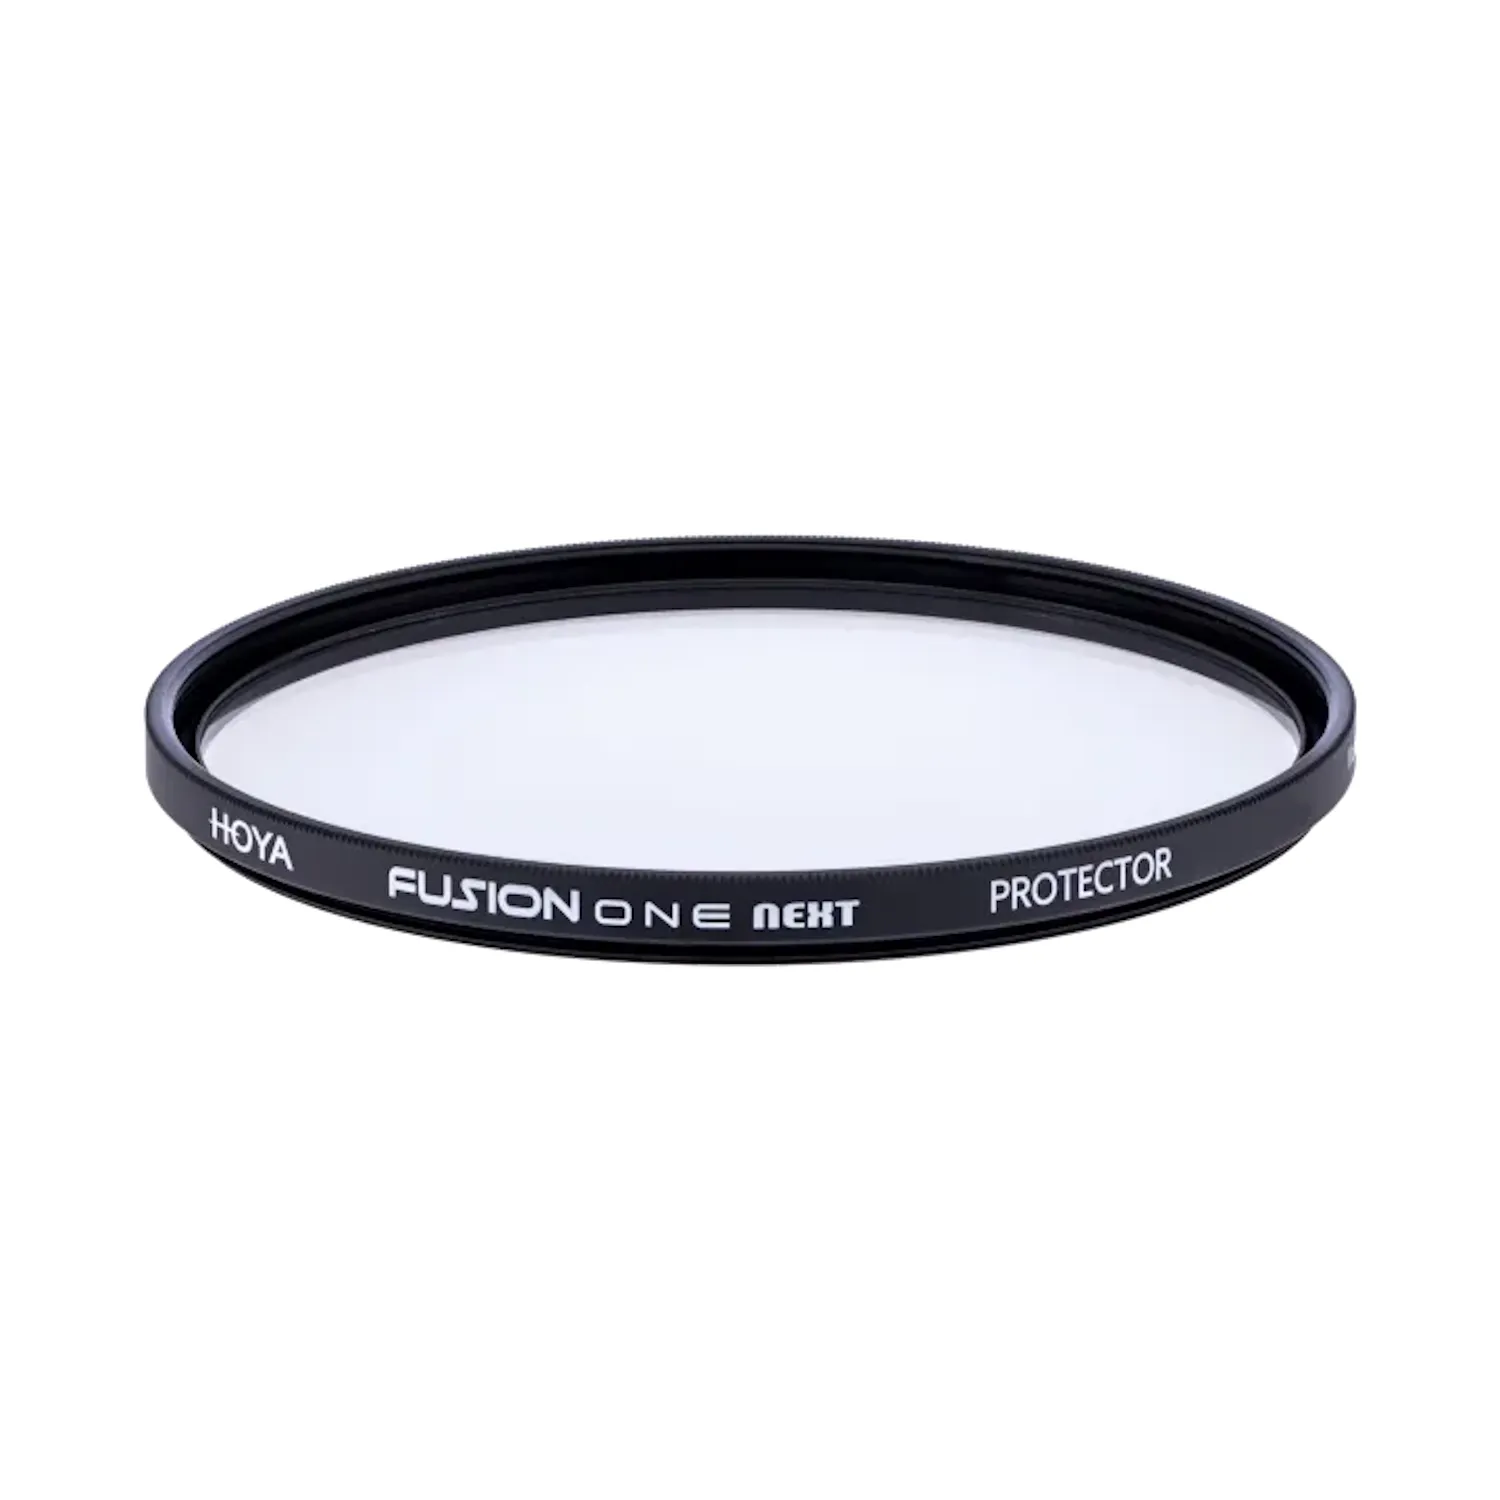 Hoya 40.5mm Fusion ONE Next Protector Filter for Pentax 17